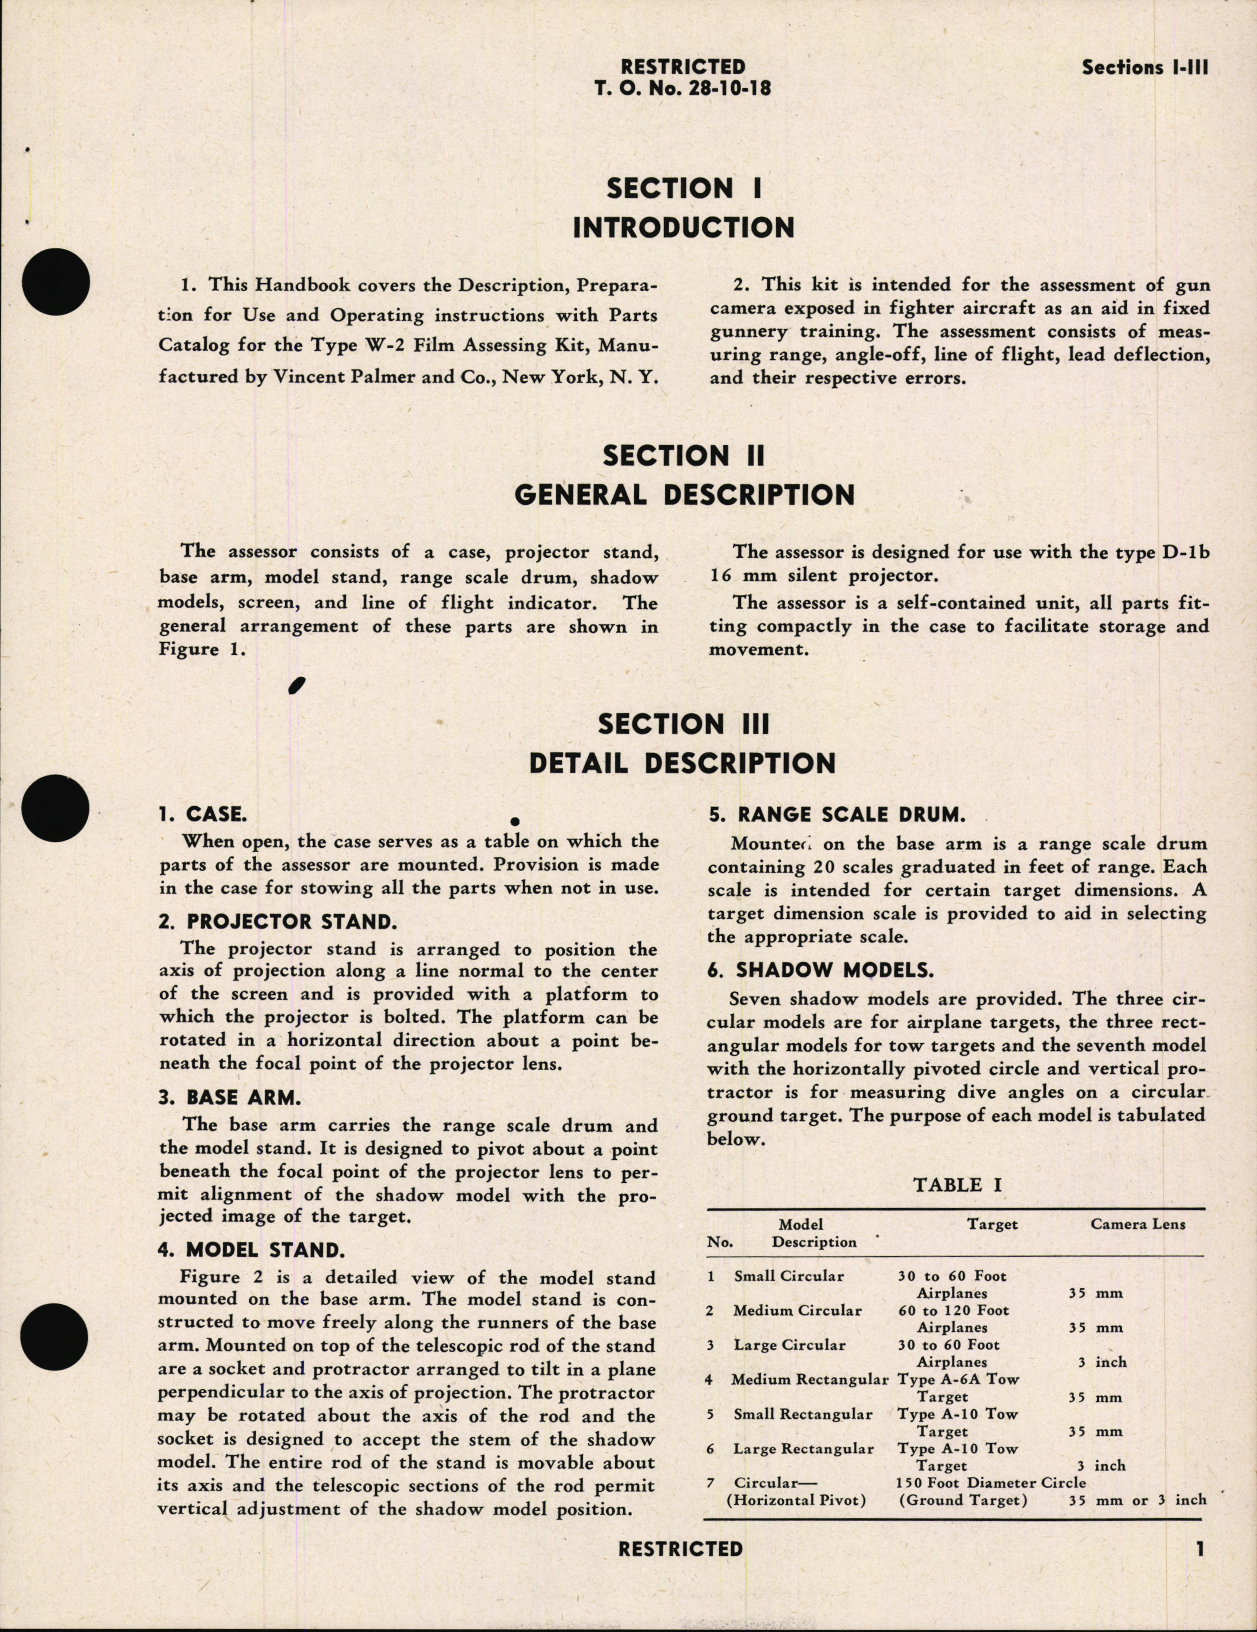 Sample page 5 from AirCorps Library document: Operation, Service and Overhaul Instructions with Parts Catalog for Film Assessing Kit Type W-2